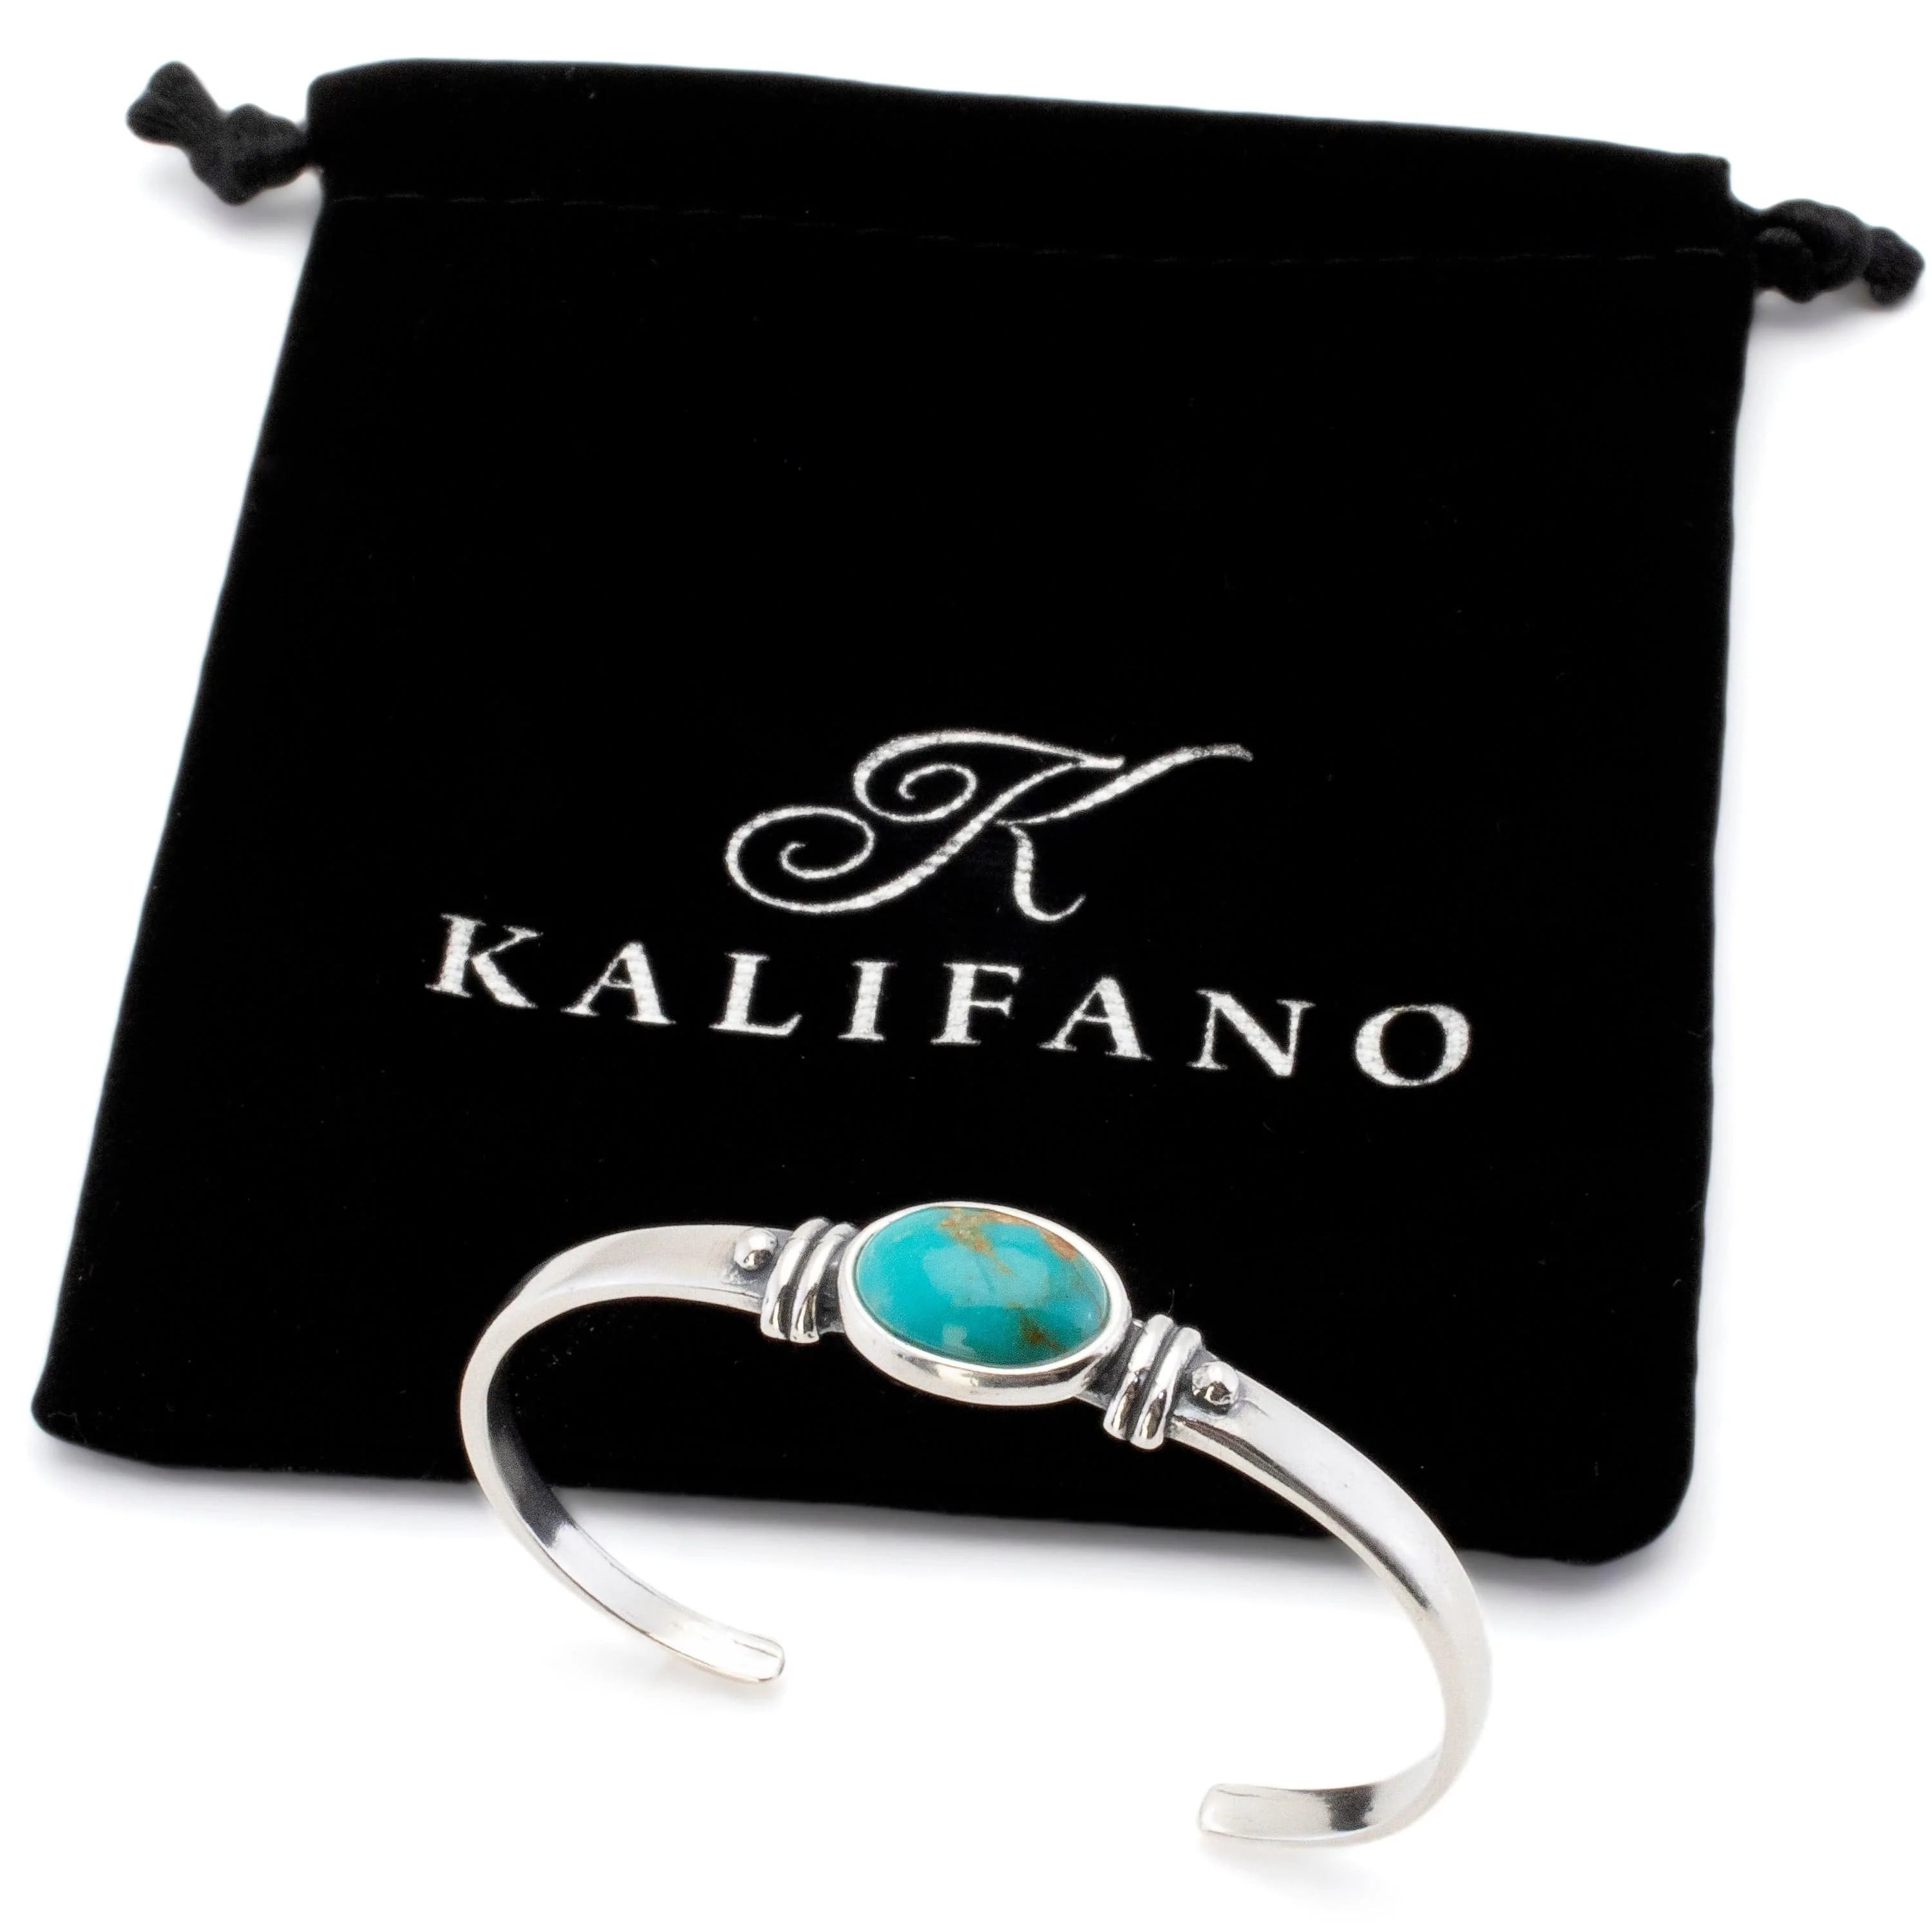 Kalifano Southwest Silver Jewelry Oval Kingman Turquoise USA Handmade 925 Sterling Silver Cuff NMB350.002